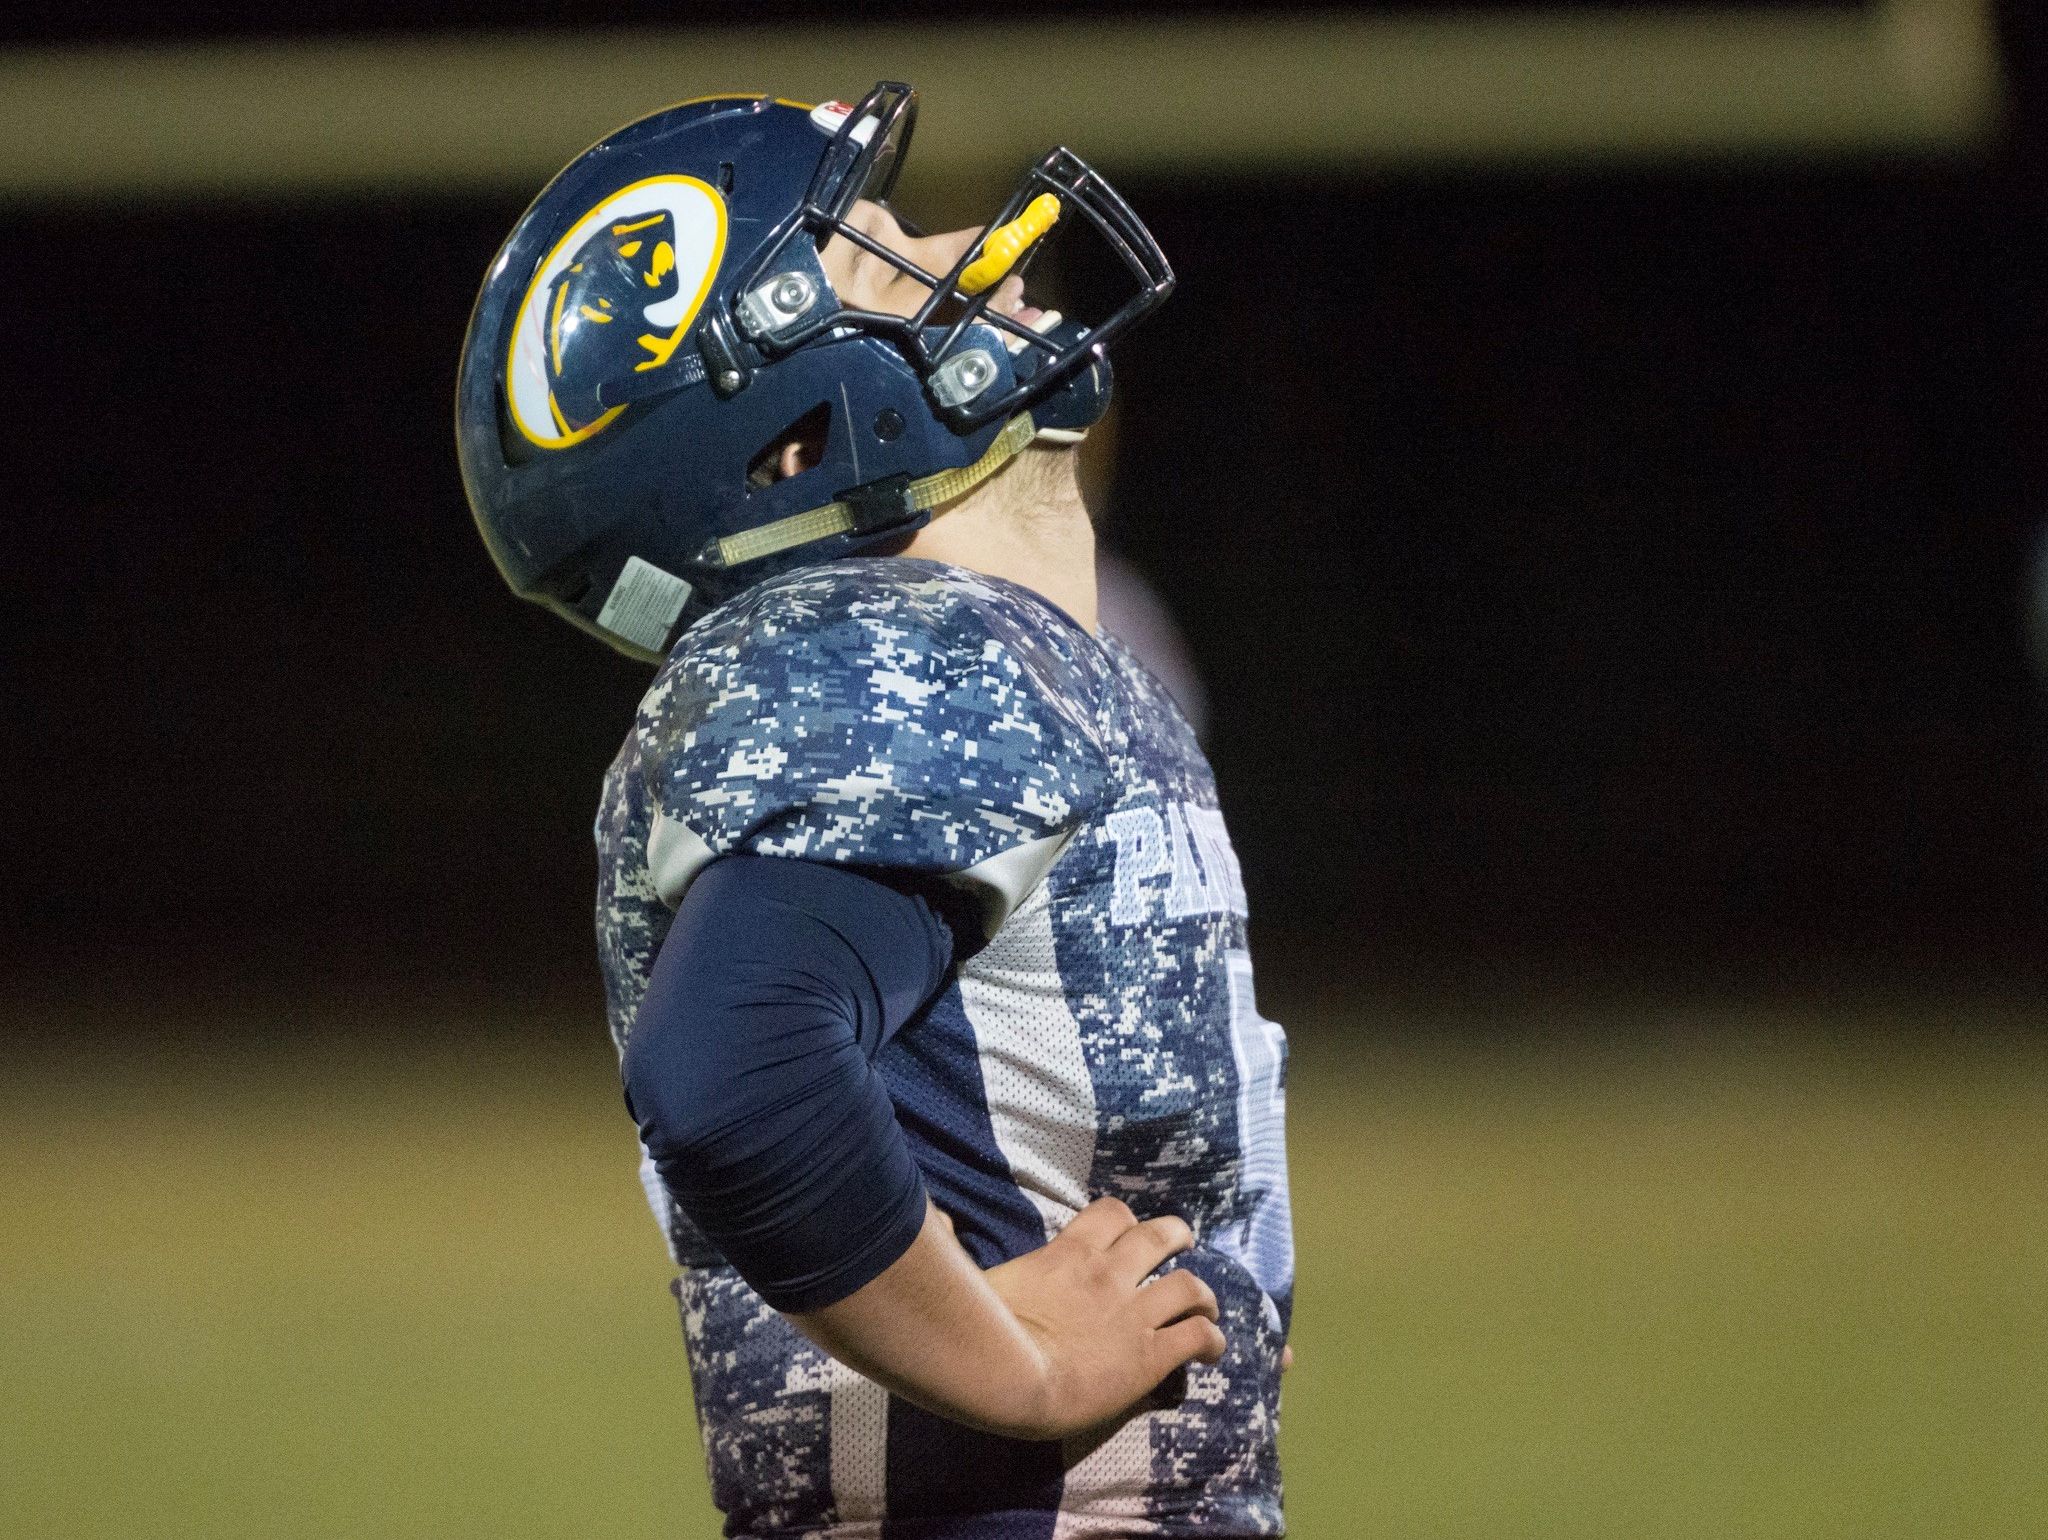 DeWitt’s football run ends with heartbreaking loss | USA TODAY High